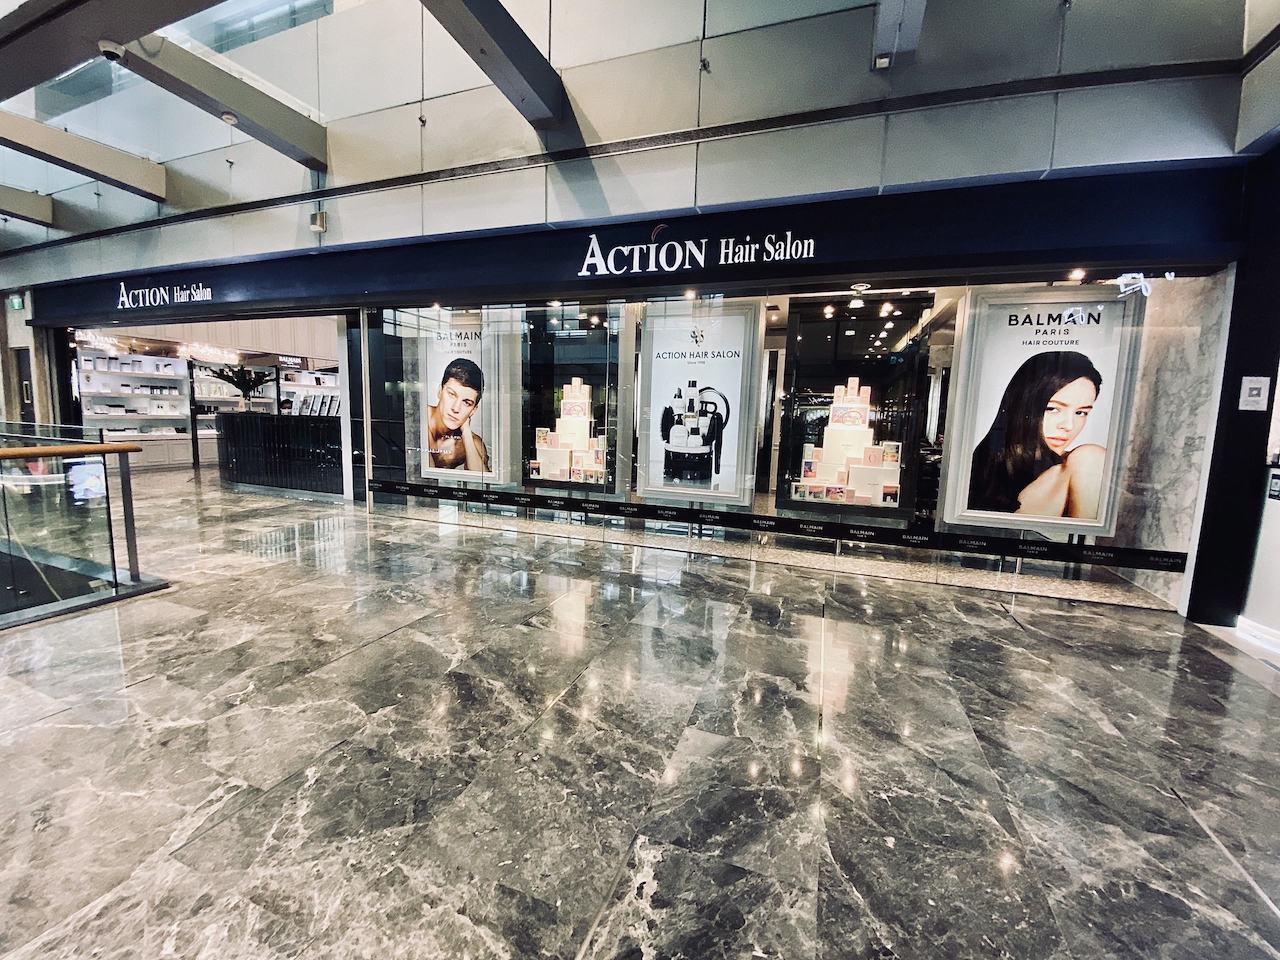 Action Hair Salon: Luxury Ambience and Top Quality Hairdressing Experiences